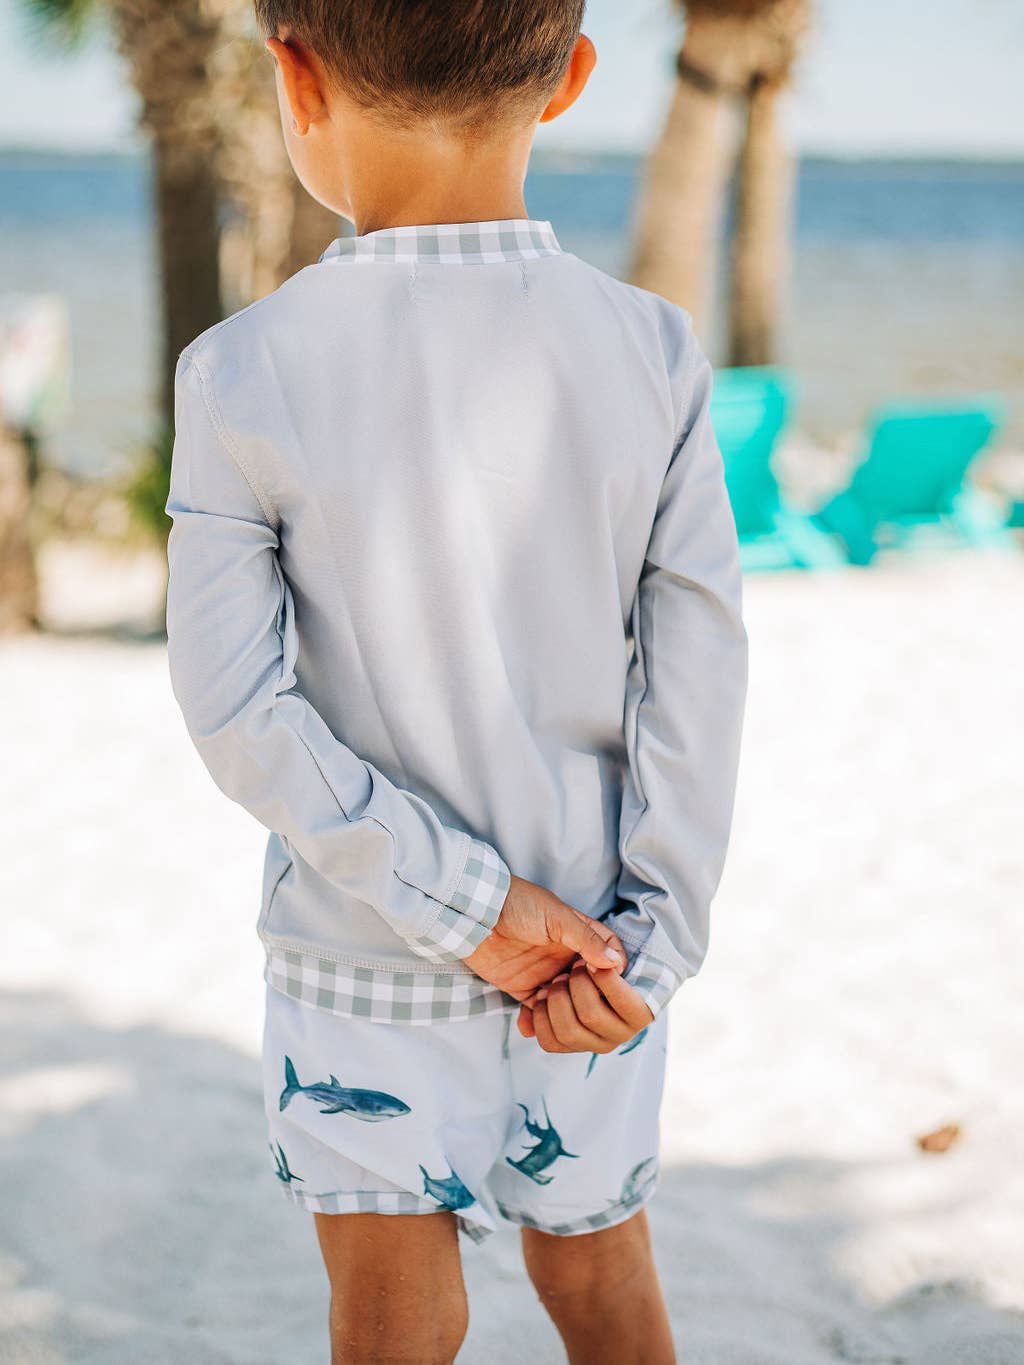 A little boy that is standing in the sand wearing Sugar Bee Clothing's Boys Gingham - Rashguard.